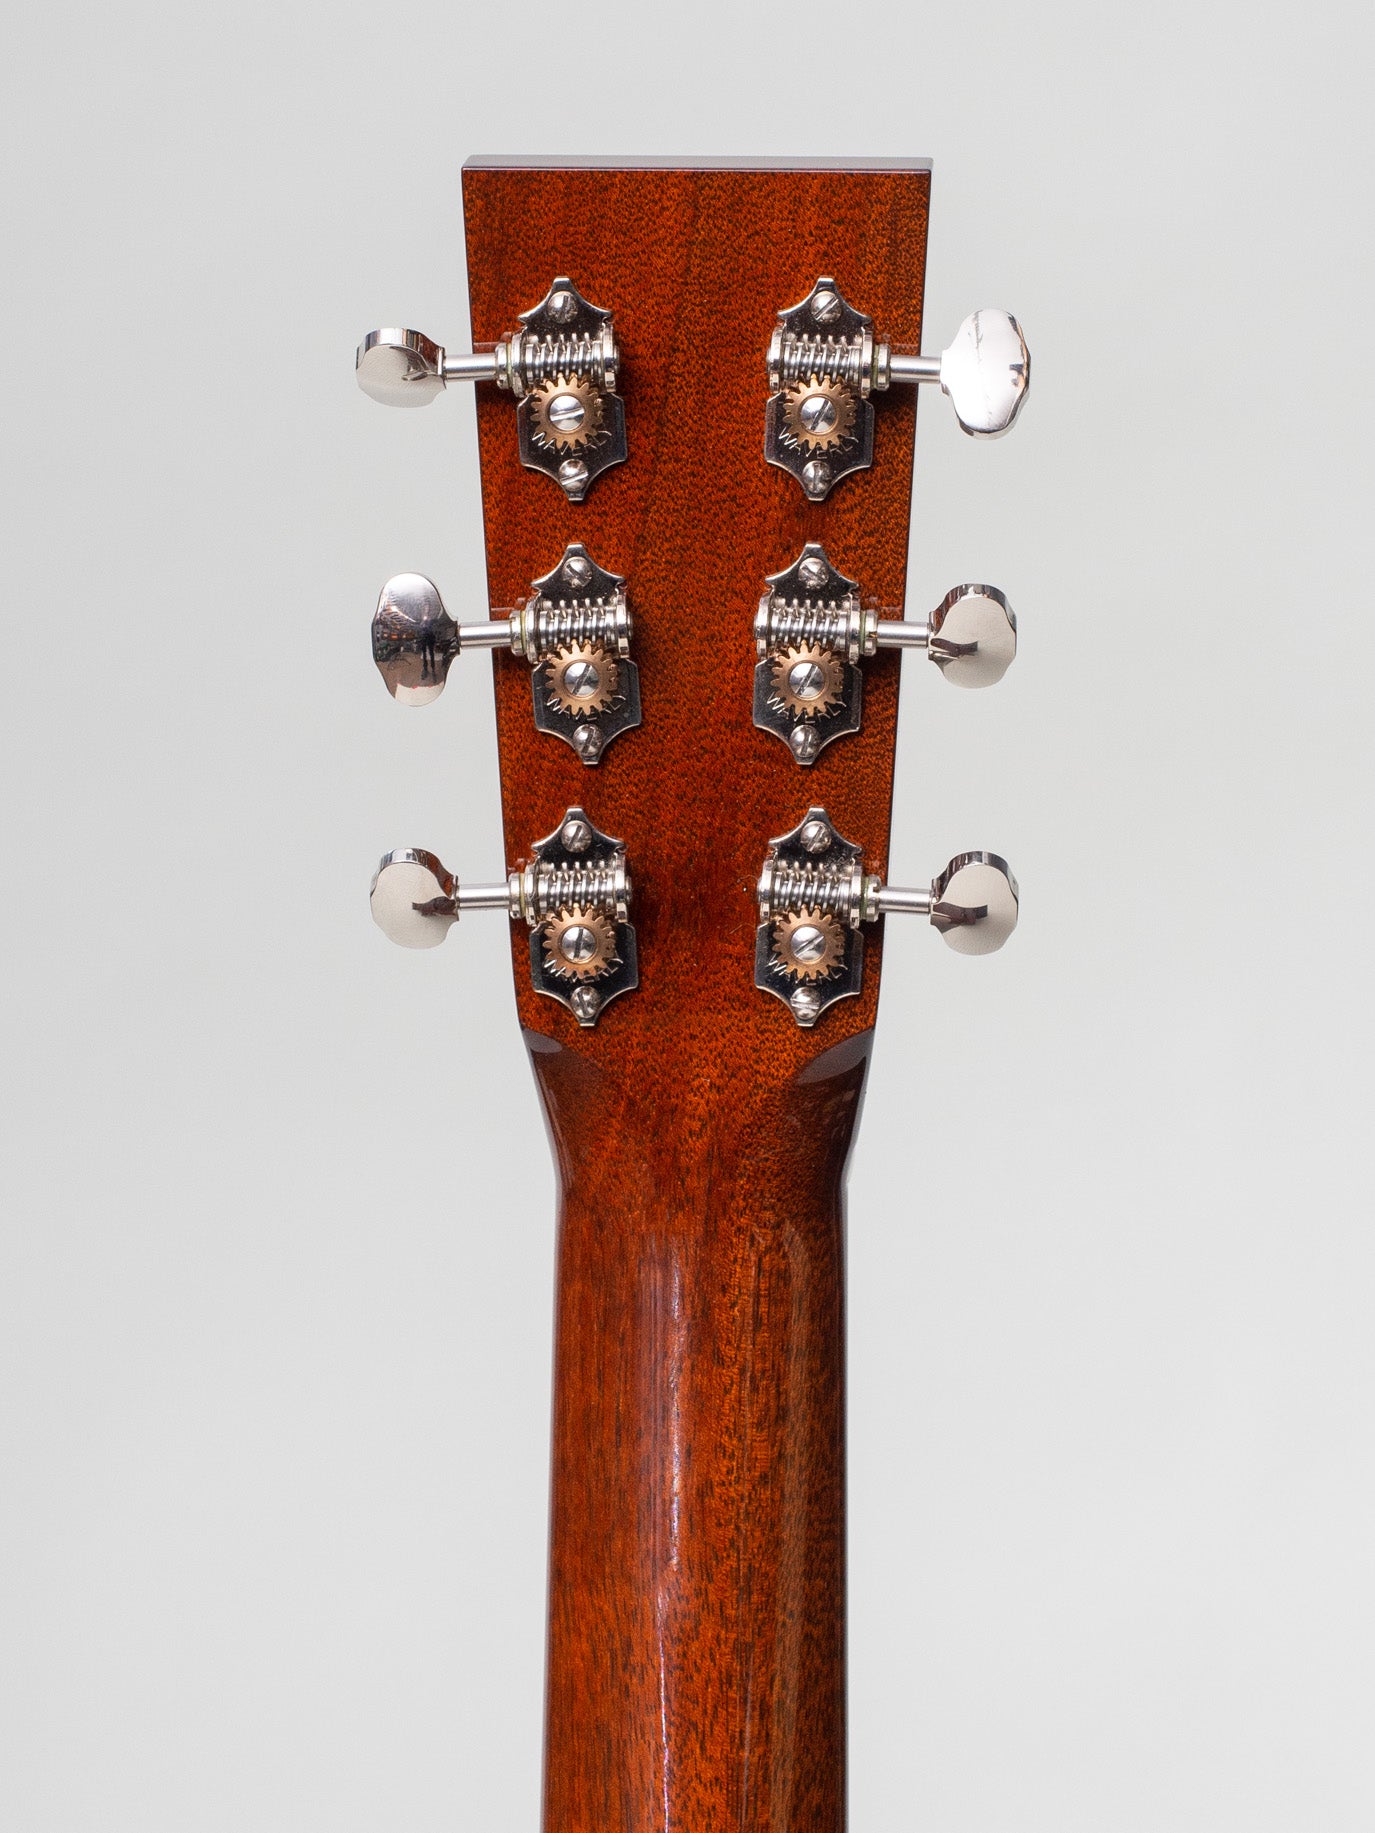 Used 2021 Collings D1A